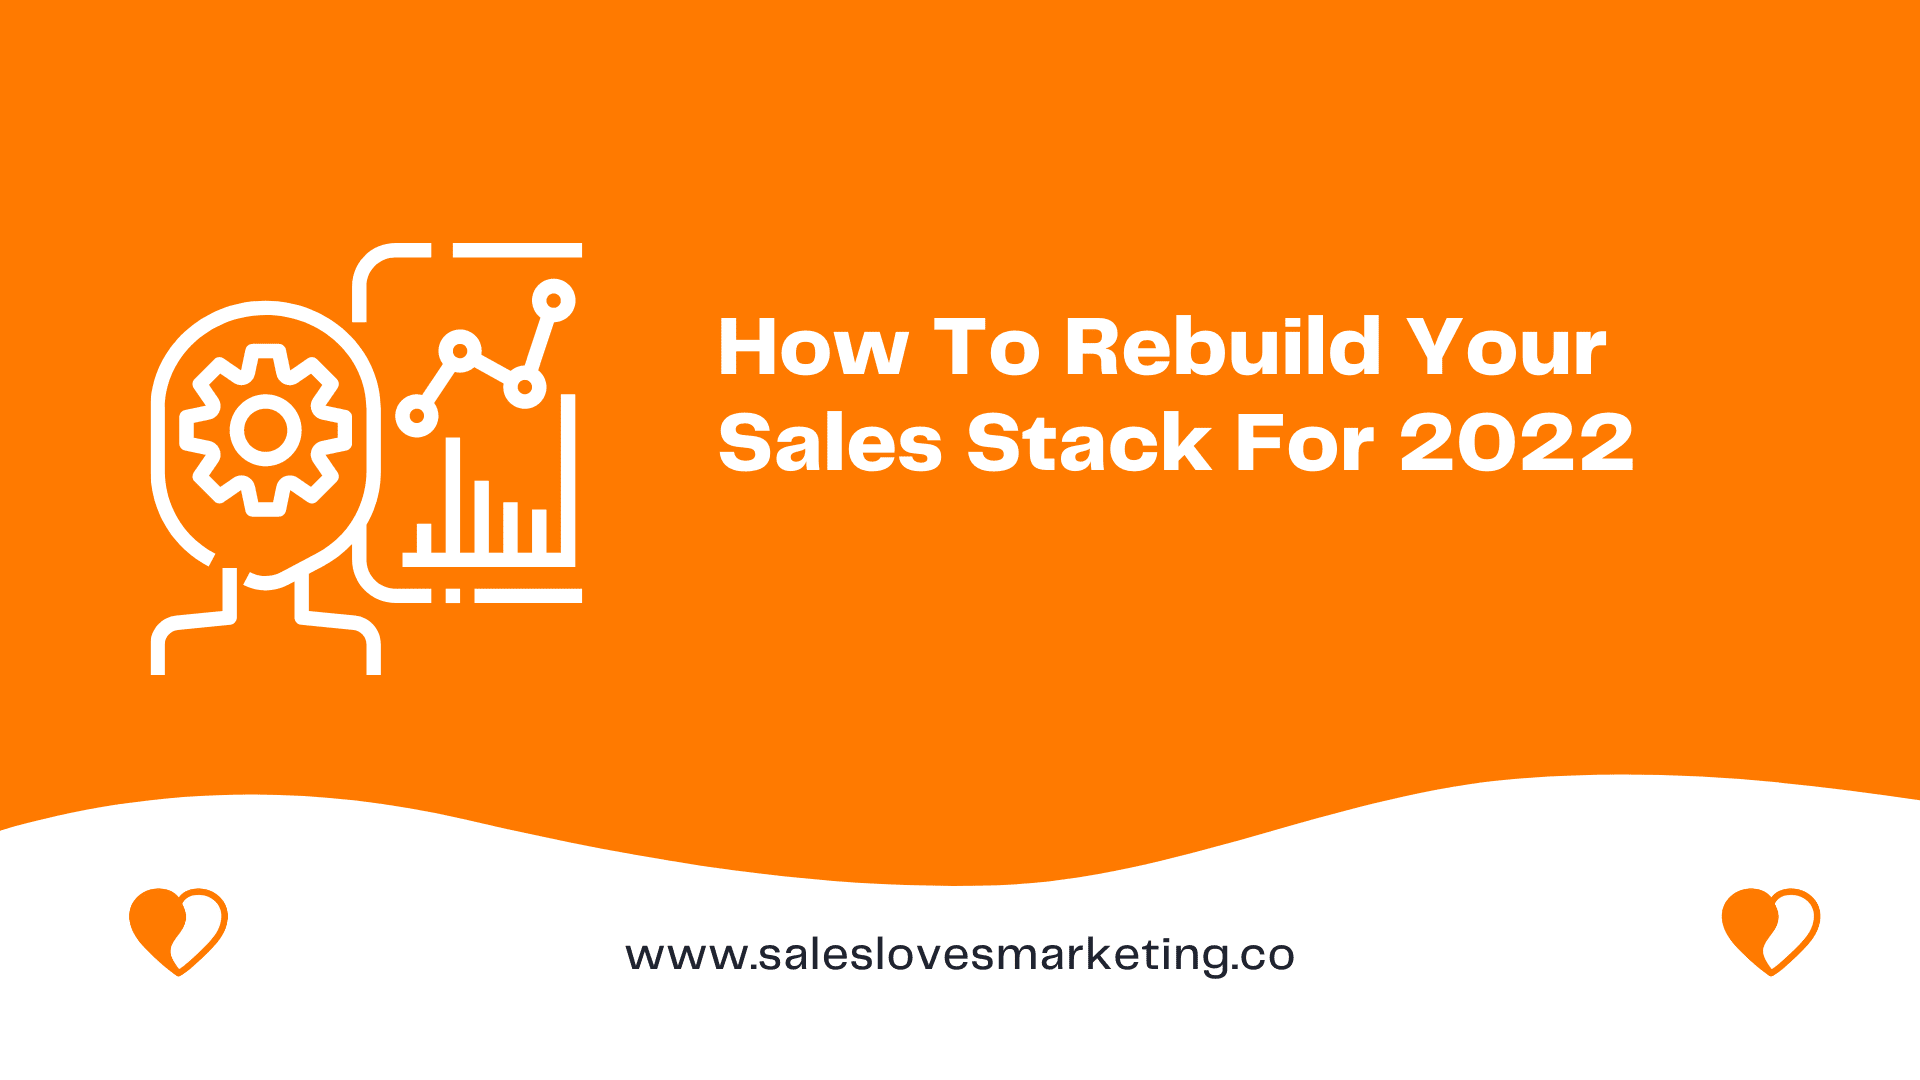 How To Rebuild Your Sales Stack For 2022